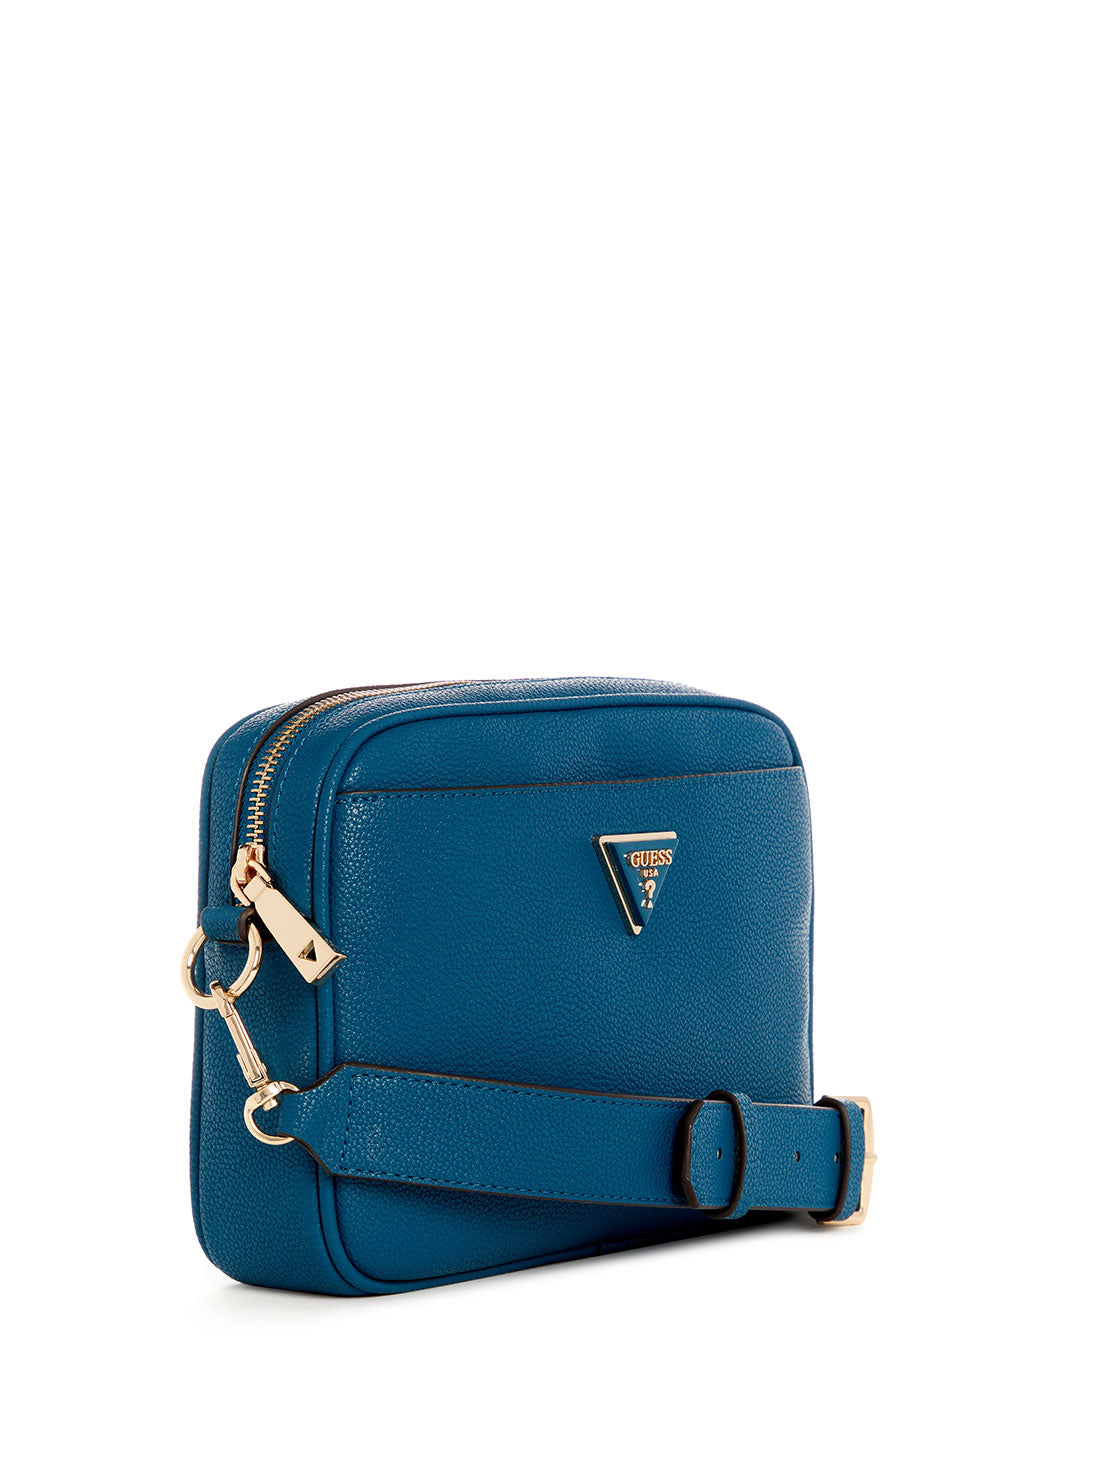 GUESS Blue Meridian Camera Bag side view